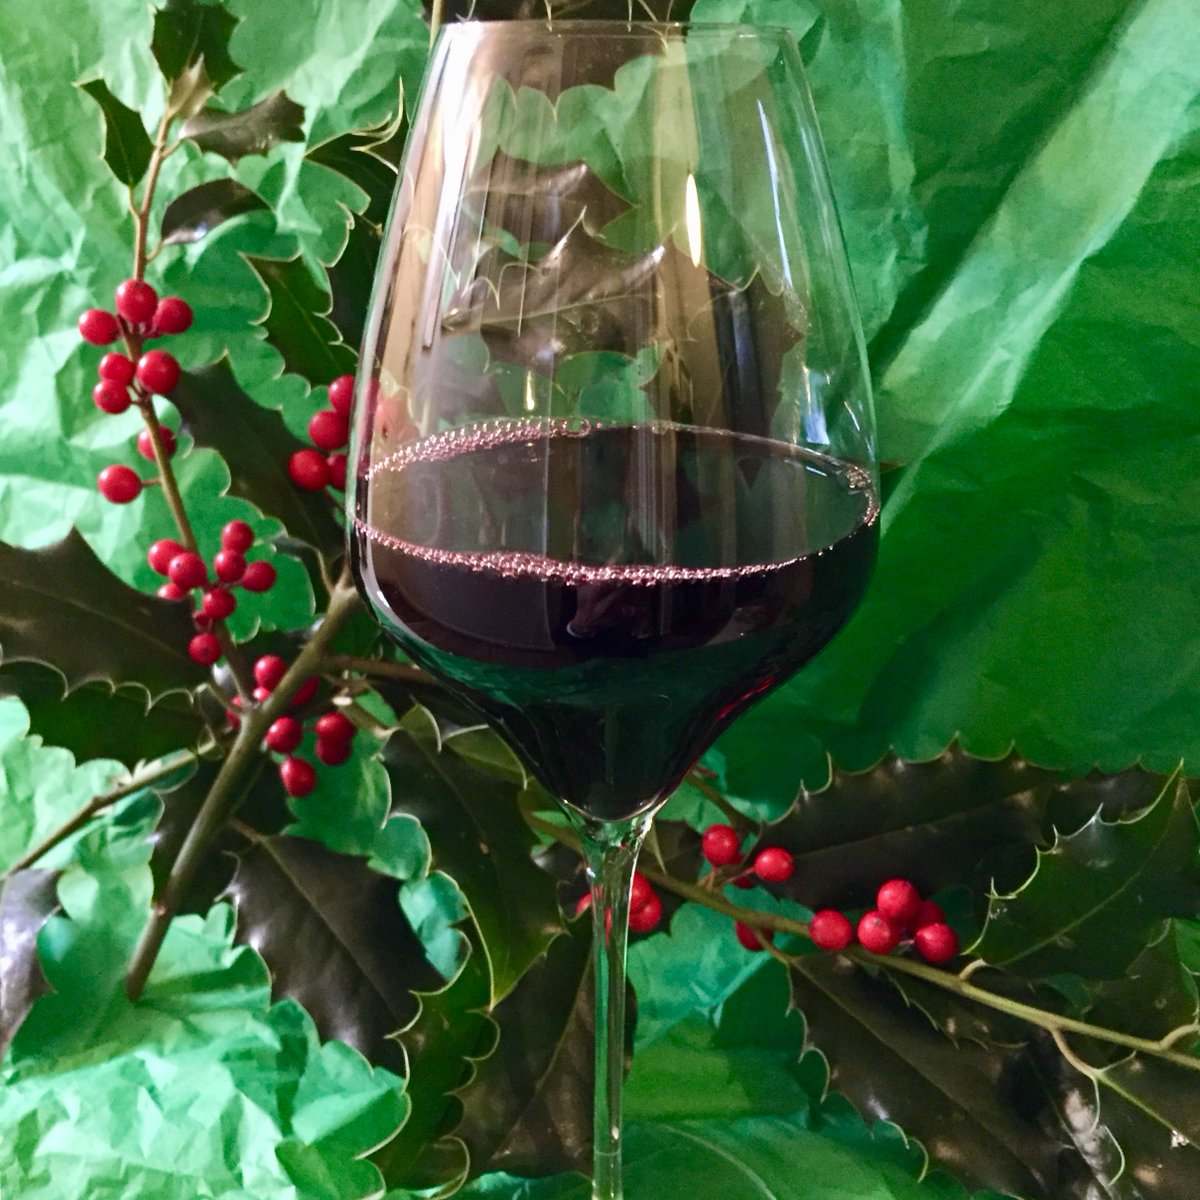 It's here! My Festive Red Wine Guide 2023, stuffed with cracking reds for every taste, occasion and budget joannasimon.com/post/the-festi… #RedWine #Christmaswine #partywine